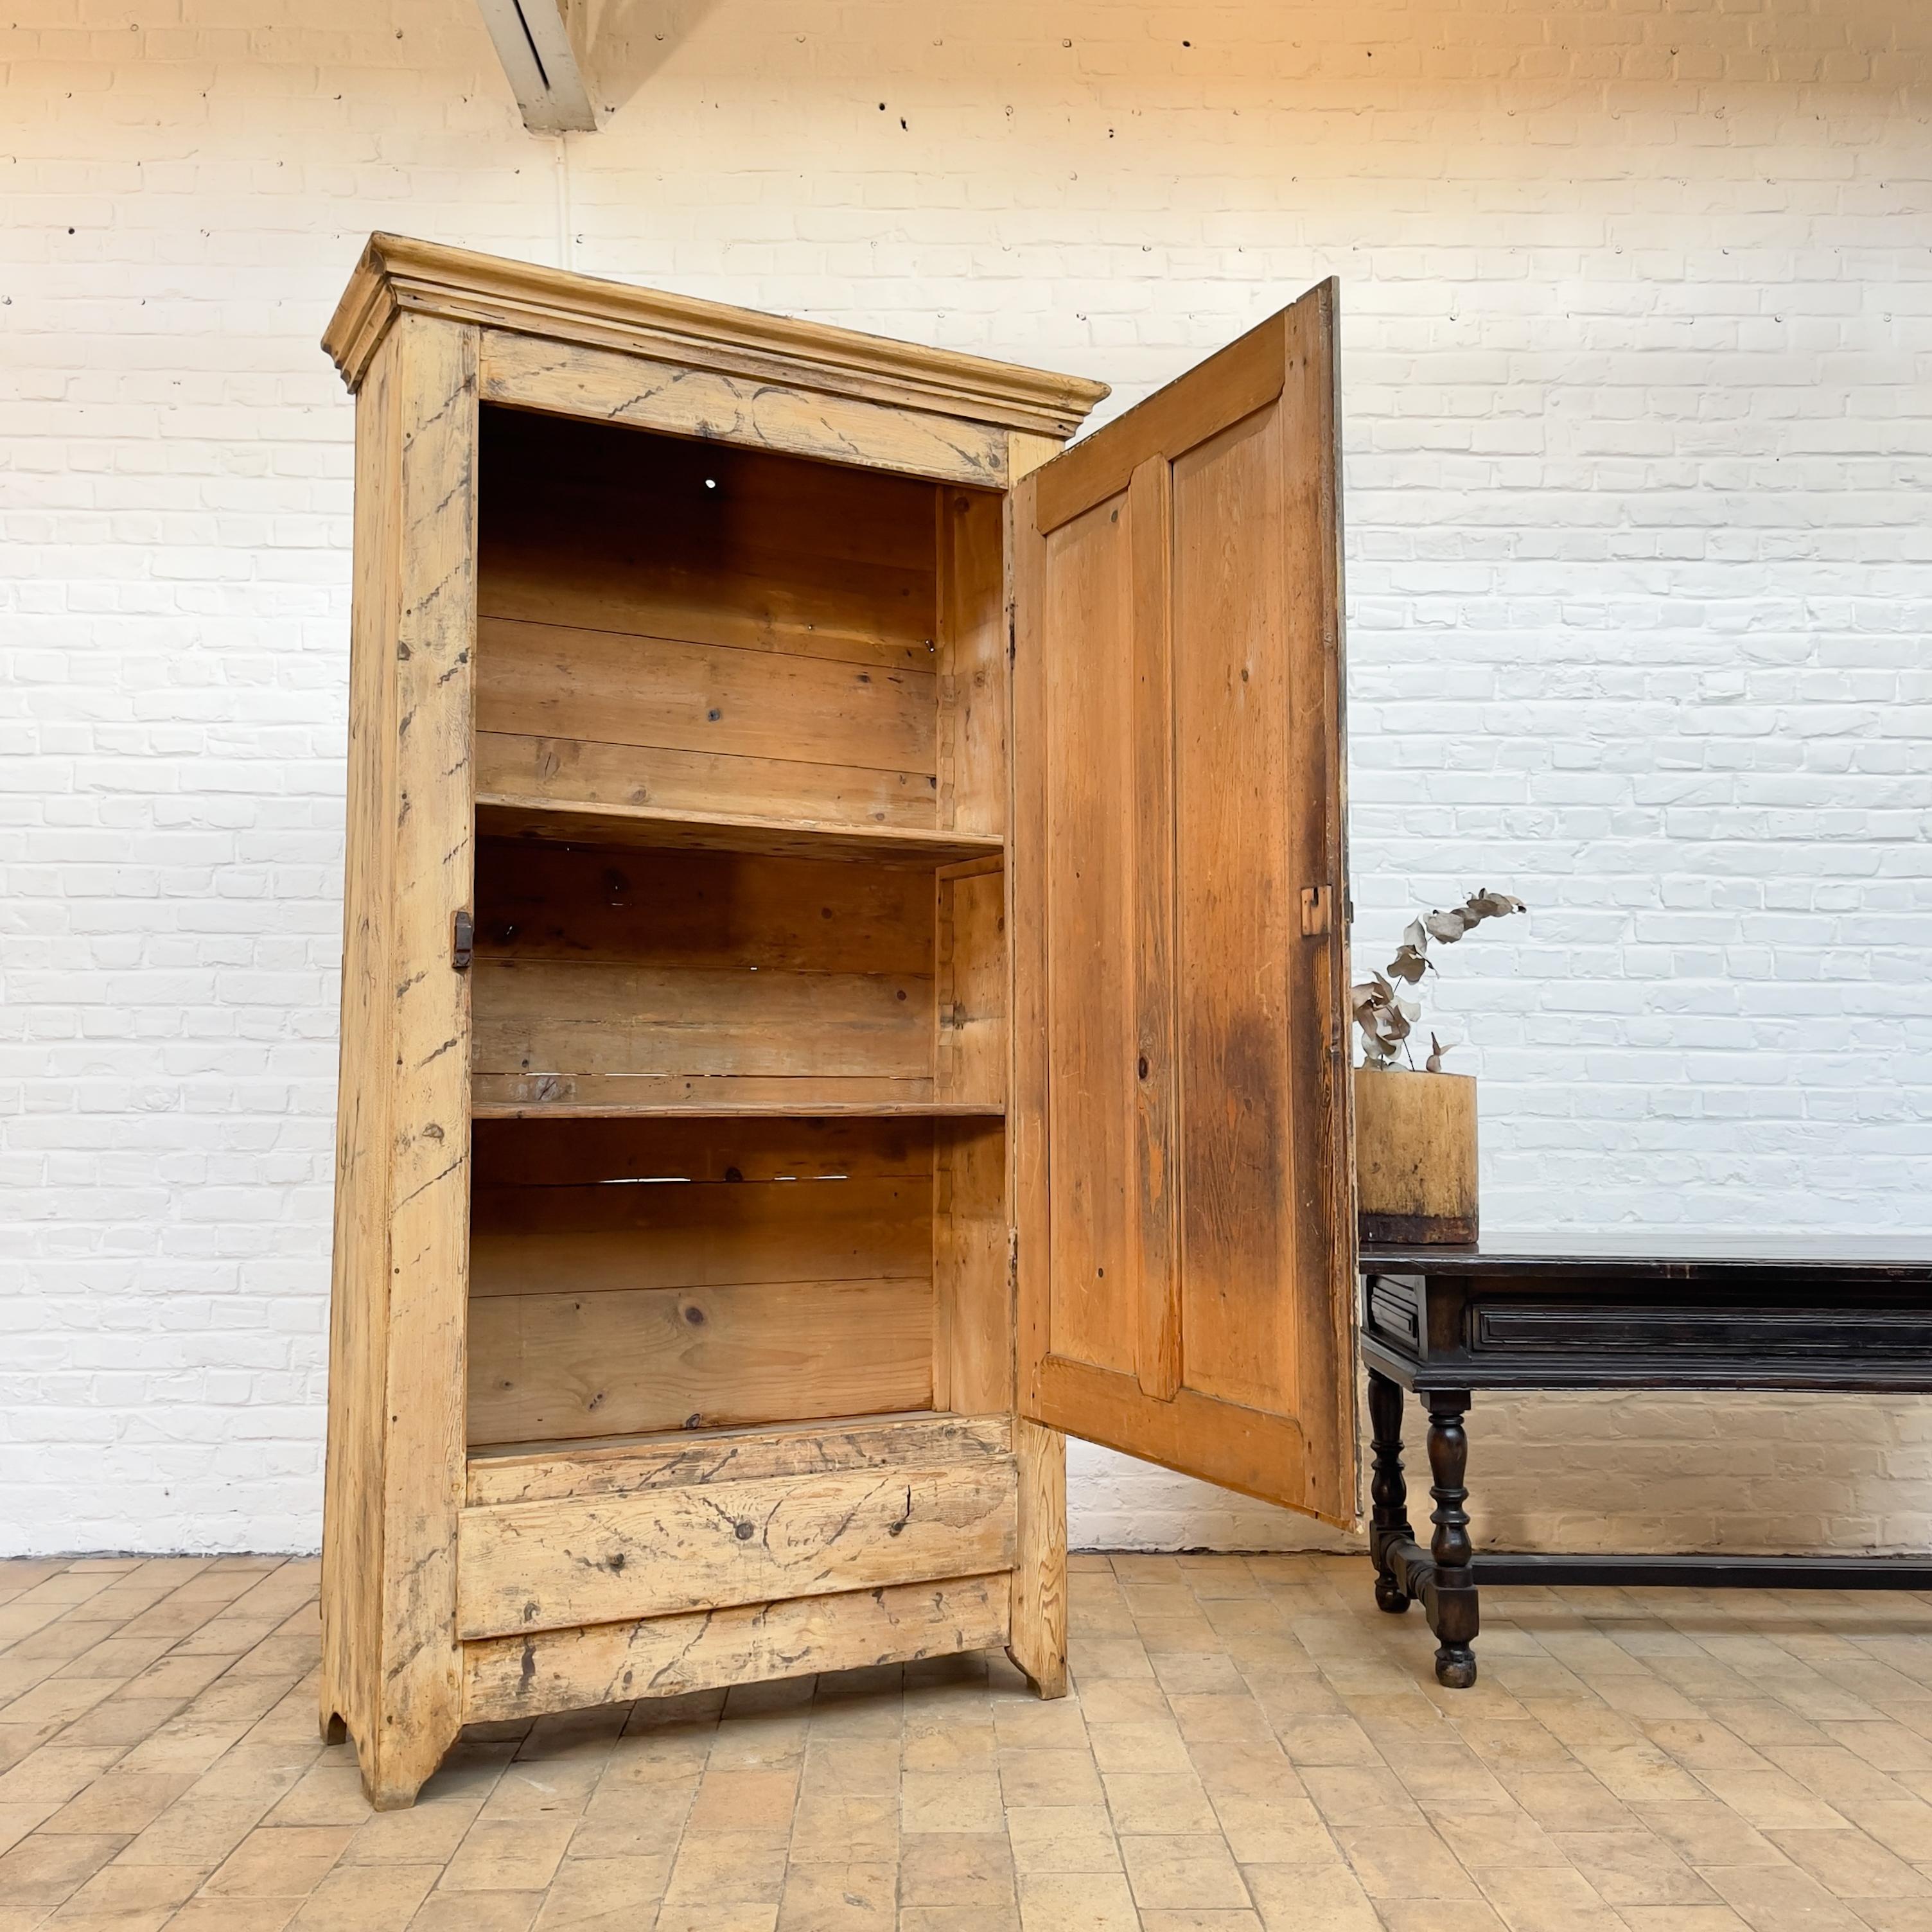 Late 19th century wooden wardrobe.
Original patina.
1 Doors and 1 drawer.
Interior shelves.
Good condition.